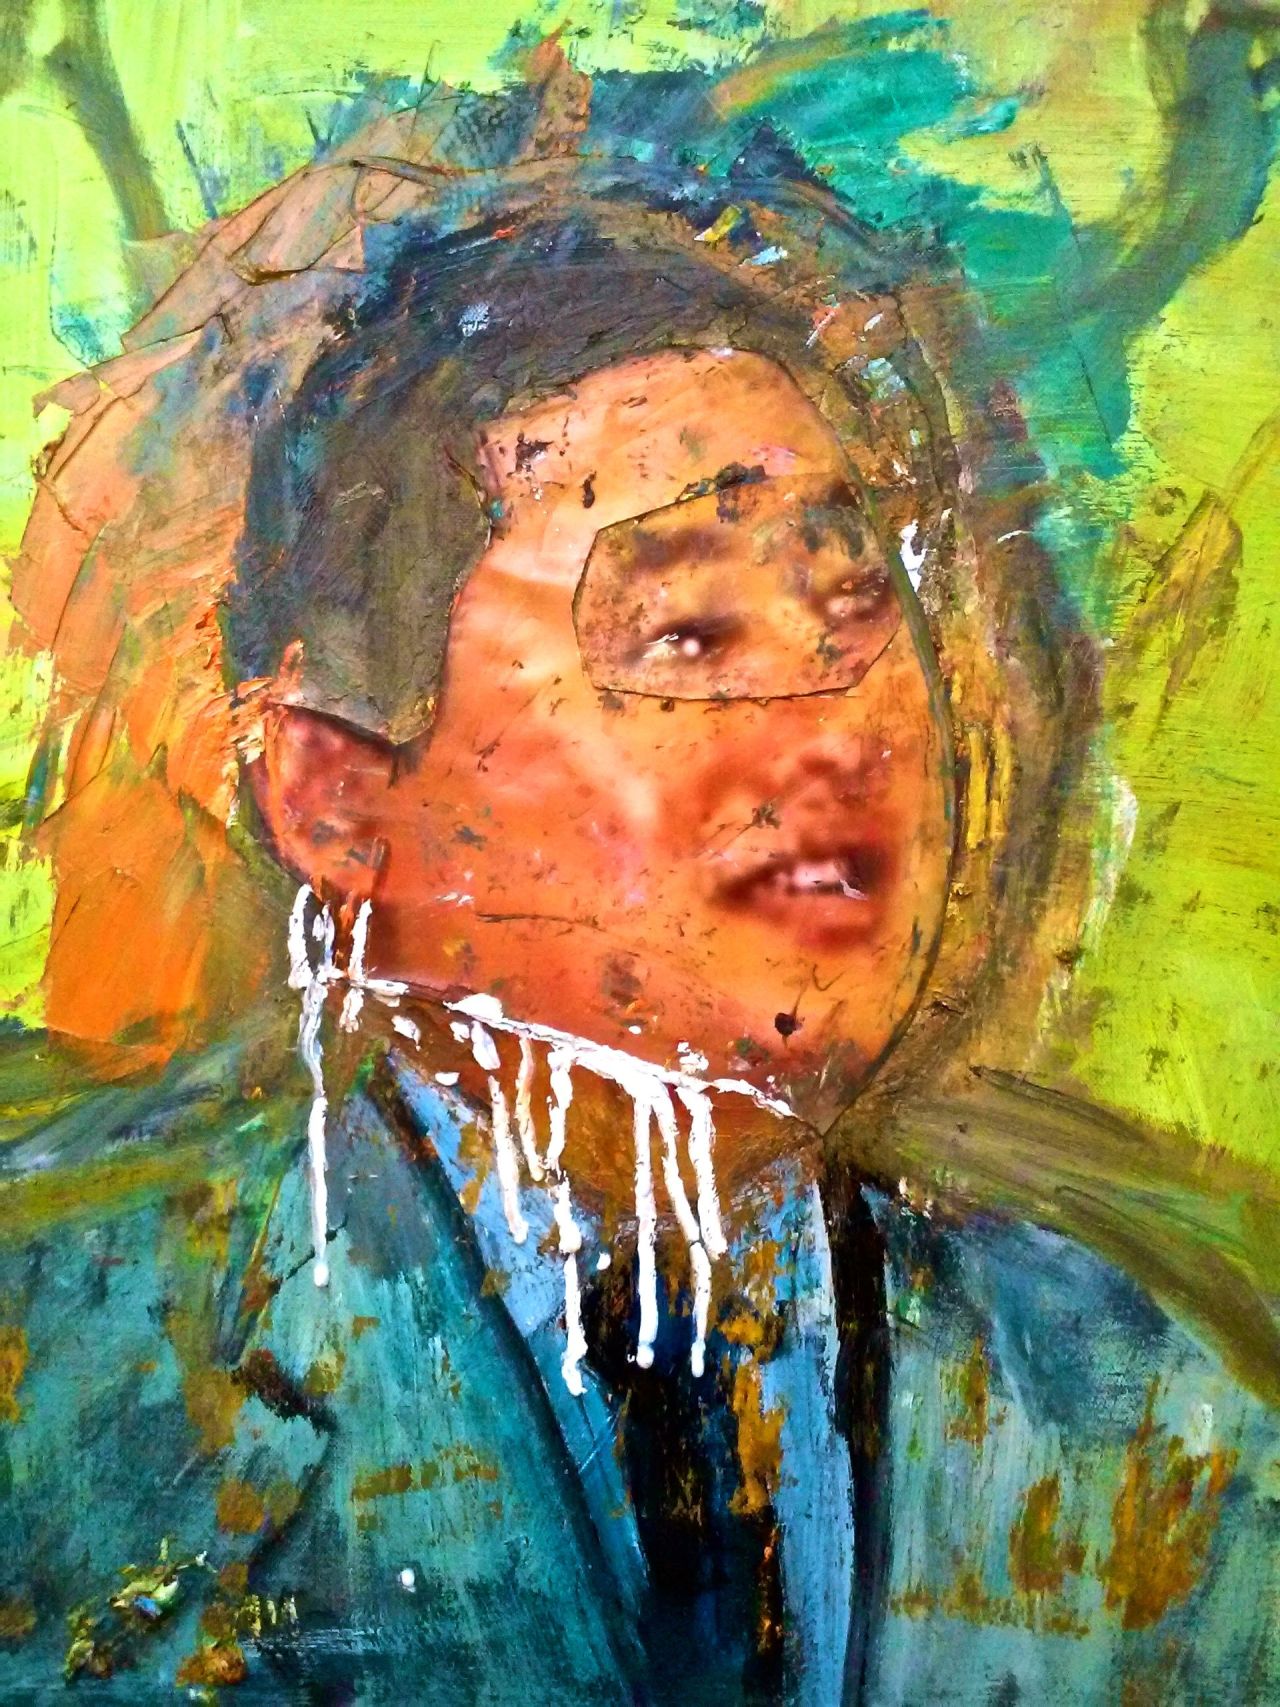 Yoo Can Torture, 16x20 oil on canvas, Sandra Koponen © 2015DEPARTMENT OF JUSTICEJohn YooDOJ&rsquo;s Office of Legal Counsel Deputy Assistant Attorney General 2001 – 2003Yoo was a member of the Bush administration&rsquo;s self-styled &ldquo;War Council&rdquo; composed of senior administration lawyers. Yoo was one of the primary authors of the memos that supplied the legal basis for the torture programs of the CIA and the DOD. His August 1, 2002 memo authorized the CIA&rsquo;s use of &ldquo;enhanced interrogation techniques,&rdquo; including waterboarding. (He had reportedly given the CIA interim approval to use the techniques several months prior.) And his March 14, 2003 memo gave expansive authority to the military to torture detainees. He also drafted numerous other memos giving the executive nearly unchecked authority in the &ldquo;war on terror,&rdquo; including memos in which he concluded that the President had the unilateral authority to suspend the United States&rsquo; obligations under international treaties. In crafting his memos, Yoo repeatedly set aside arguments from top State Department officials and military service lawyers that his reasoning was legally flawed and would have profoundly negative consequences for the United States.***https://www.aclu.org/infographic/infographic-torture-architects